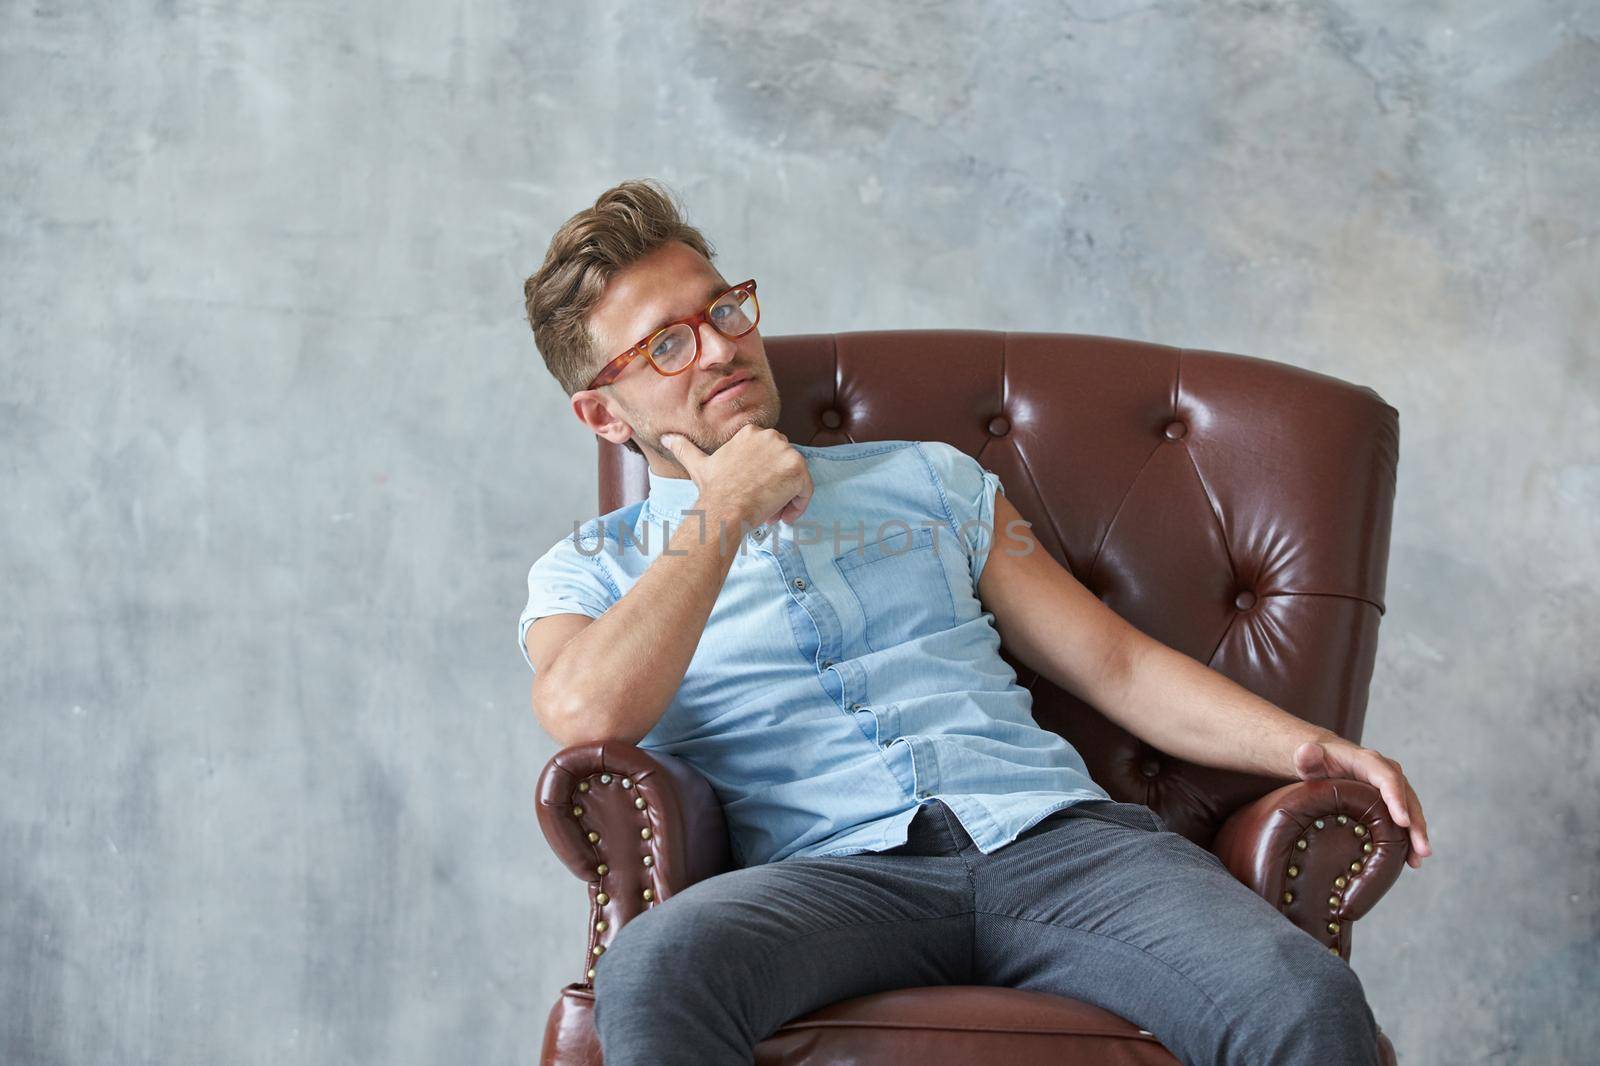 Portrait of a stylish intelligent man stares into the camera, small unshaven, charismatic, blue shirt, sitting on a brown leather chair, dialog, negotiation, short sleeve, brutal, hairstyle. High quality photo